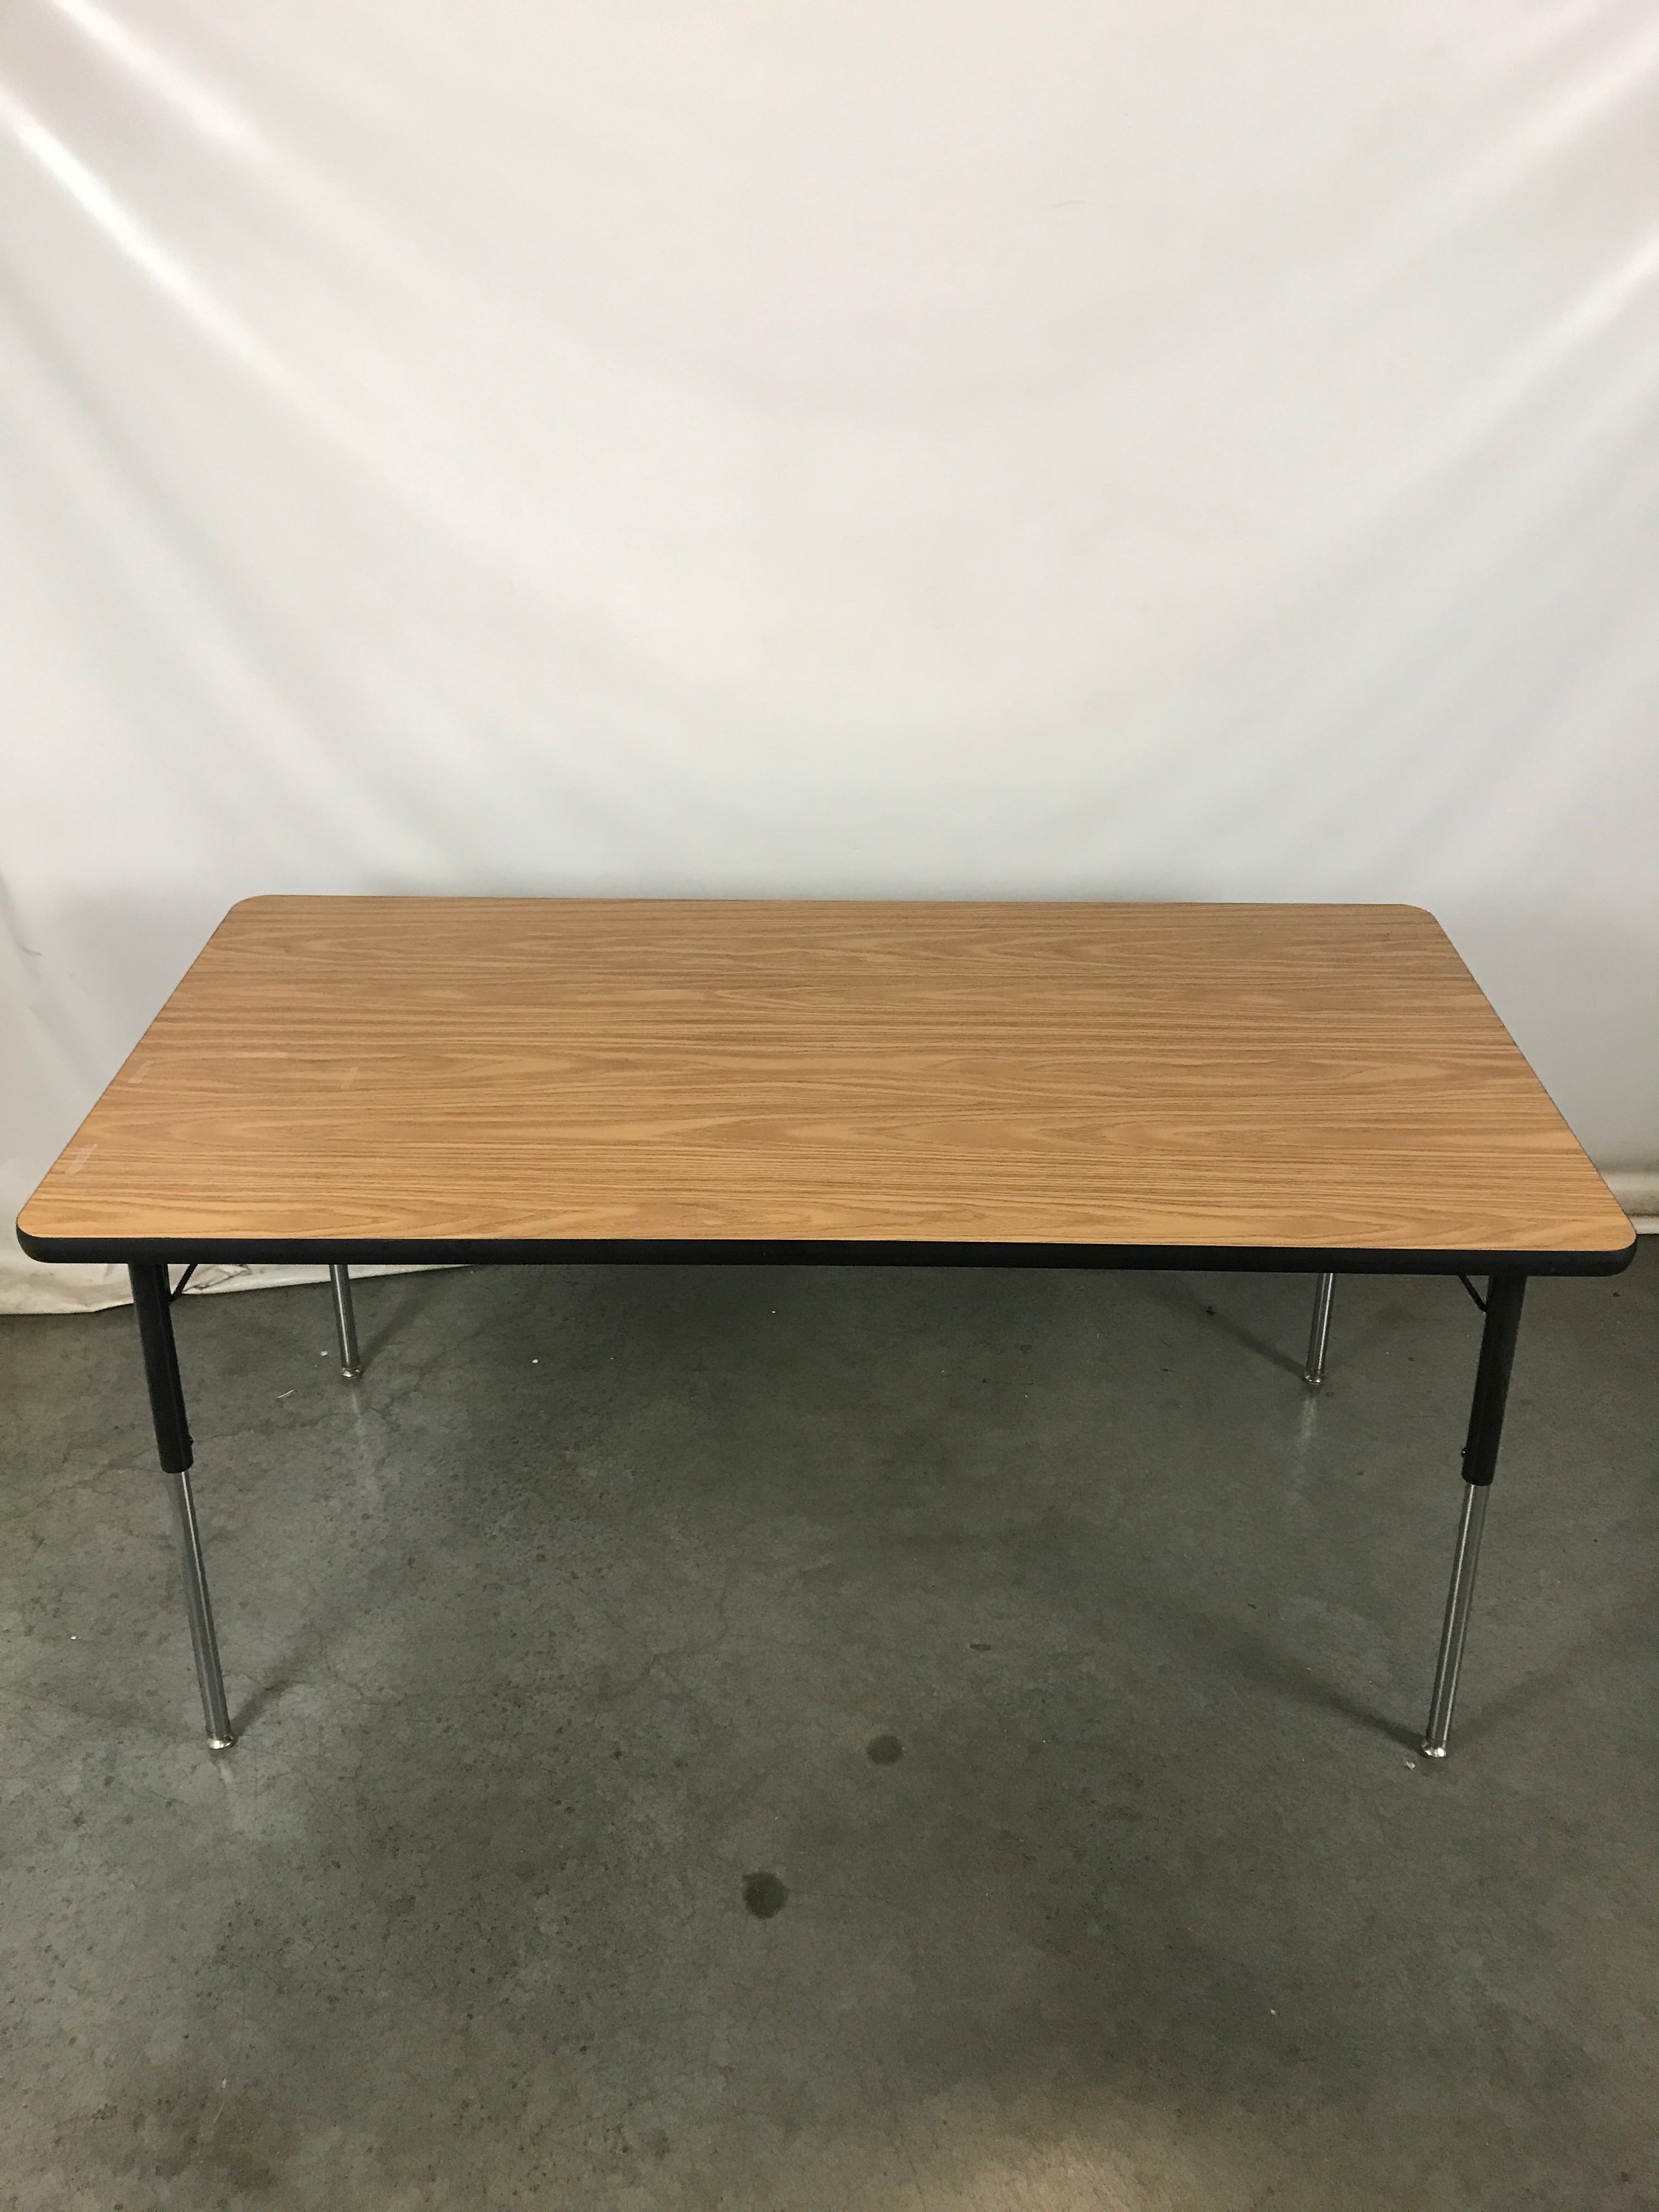 Brown Wooden Adjustable Height Table